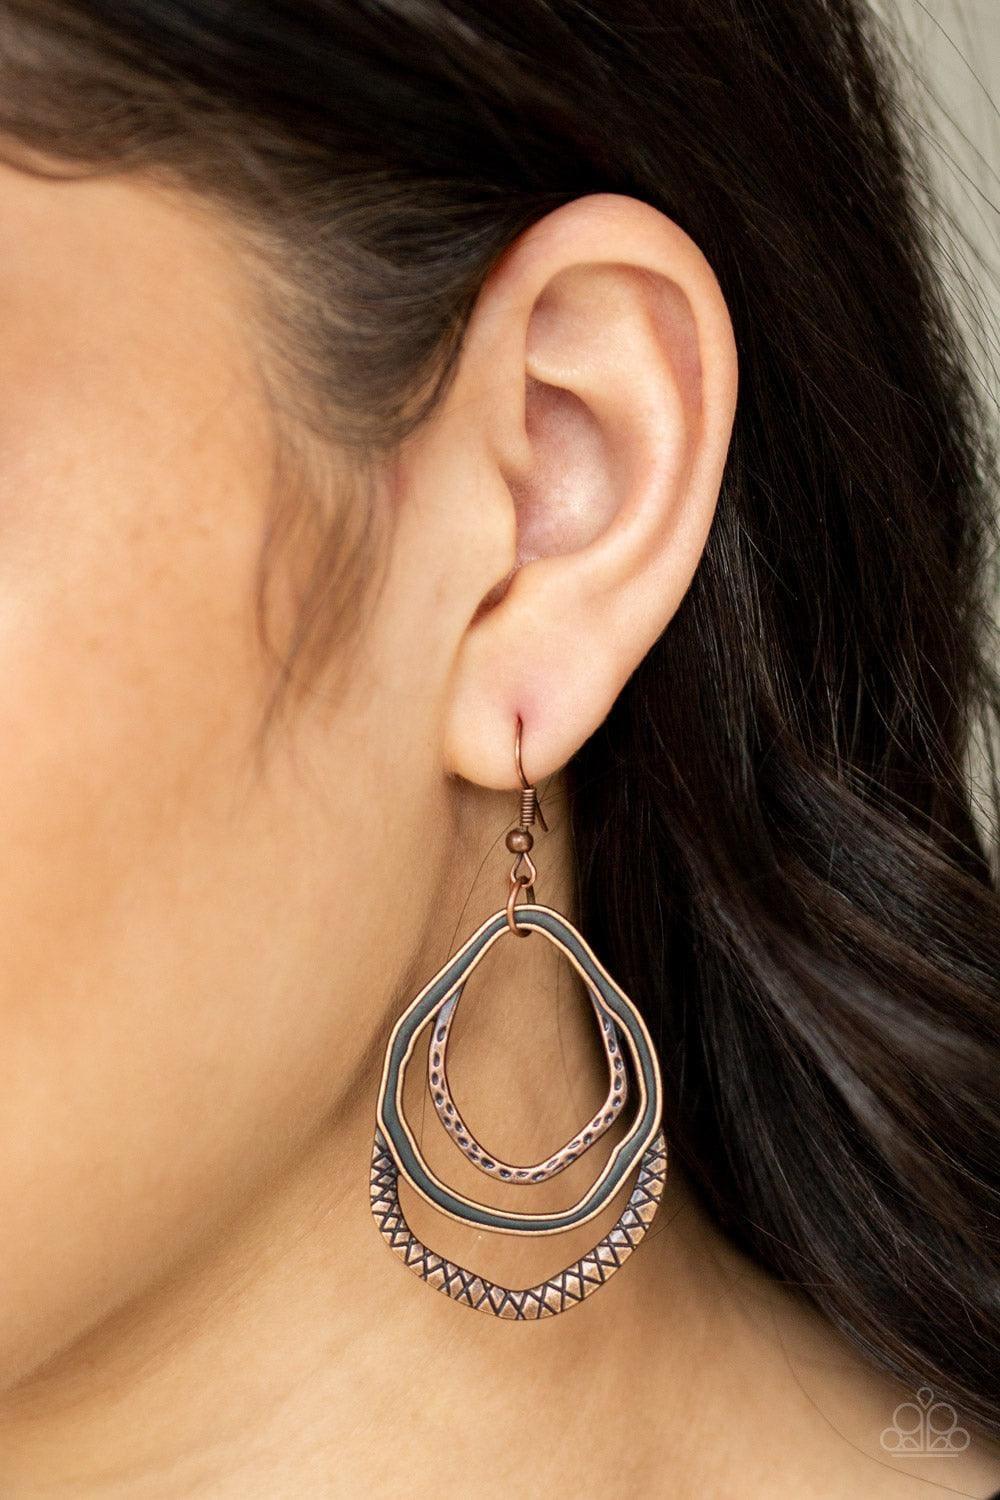 Paparazzi Accessories - Canyon Casual - Copper Earrings - Bling by JessieK